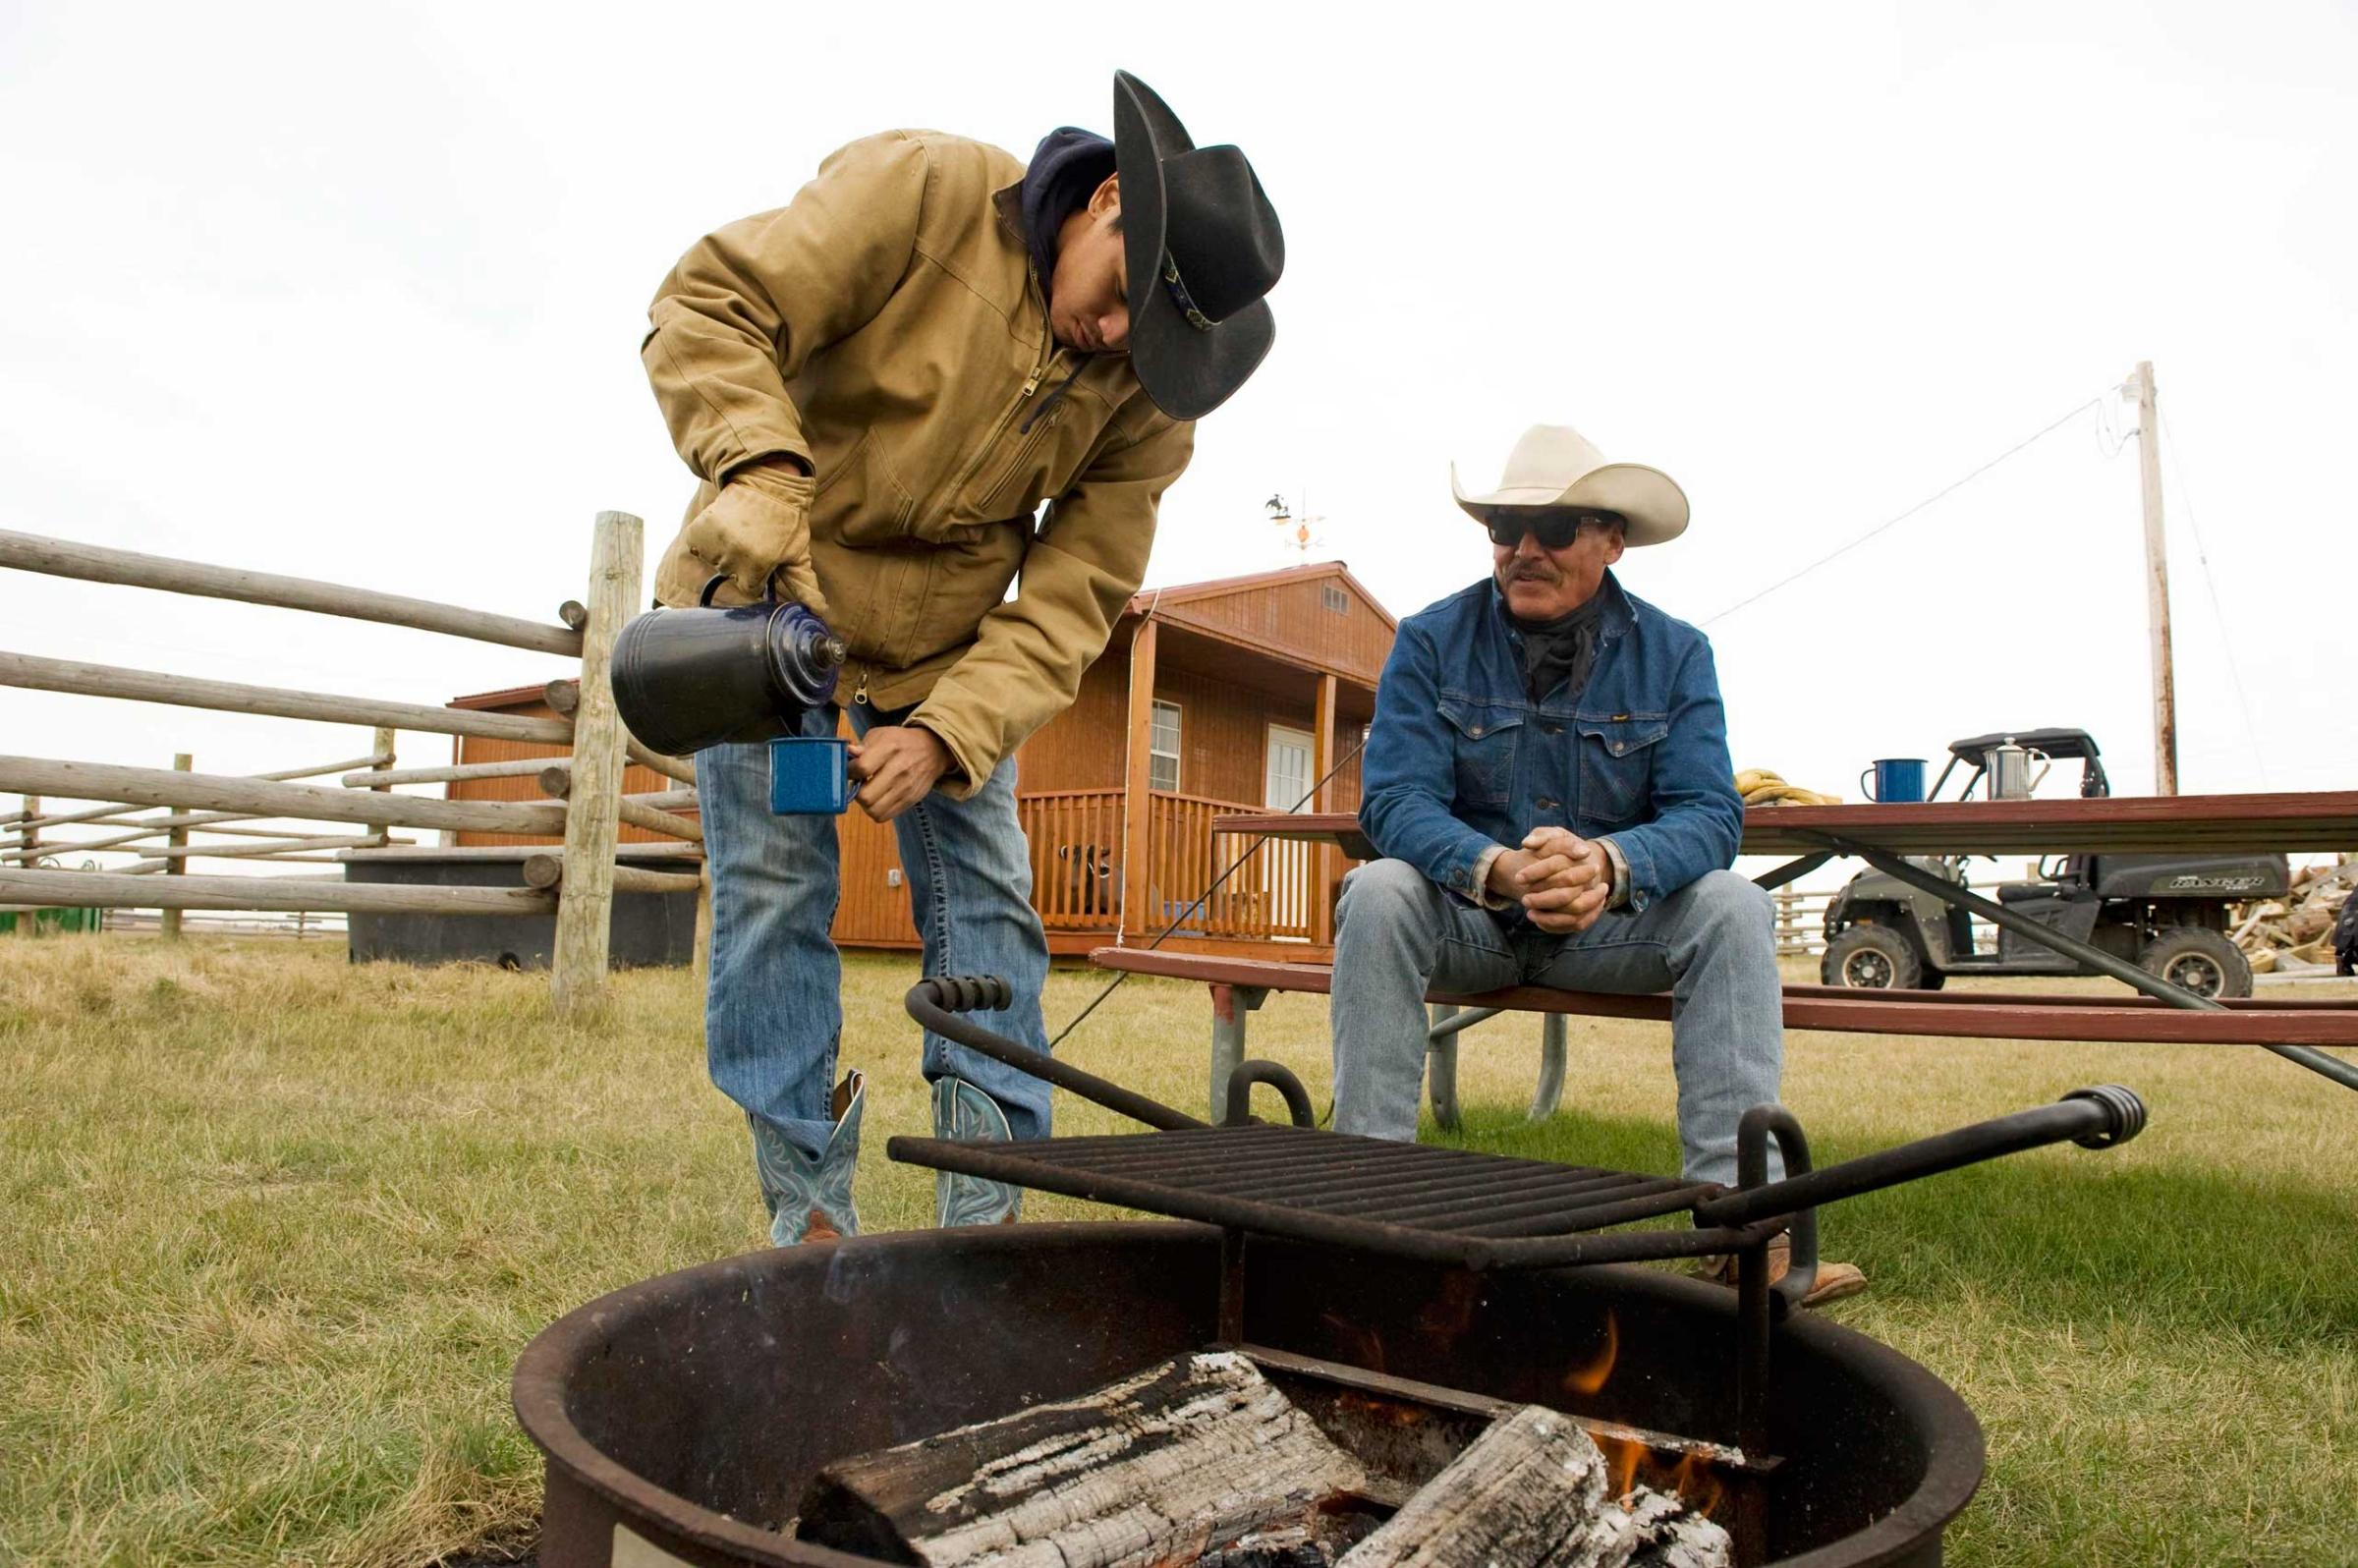 Jesse Bear and his father, Sonny James Bear, a Three Affiliated Tribes member, drink coffee over the campfire during a break from training horses on their ranch just off the Fort Berthold Reservation in North Dakota